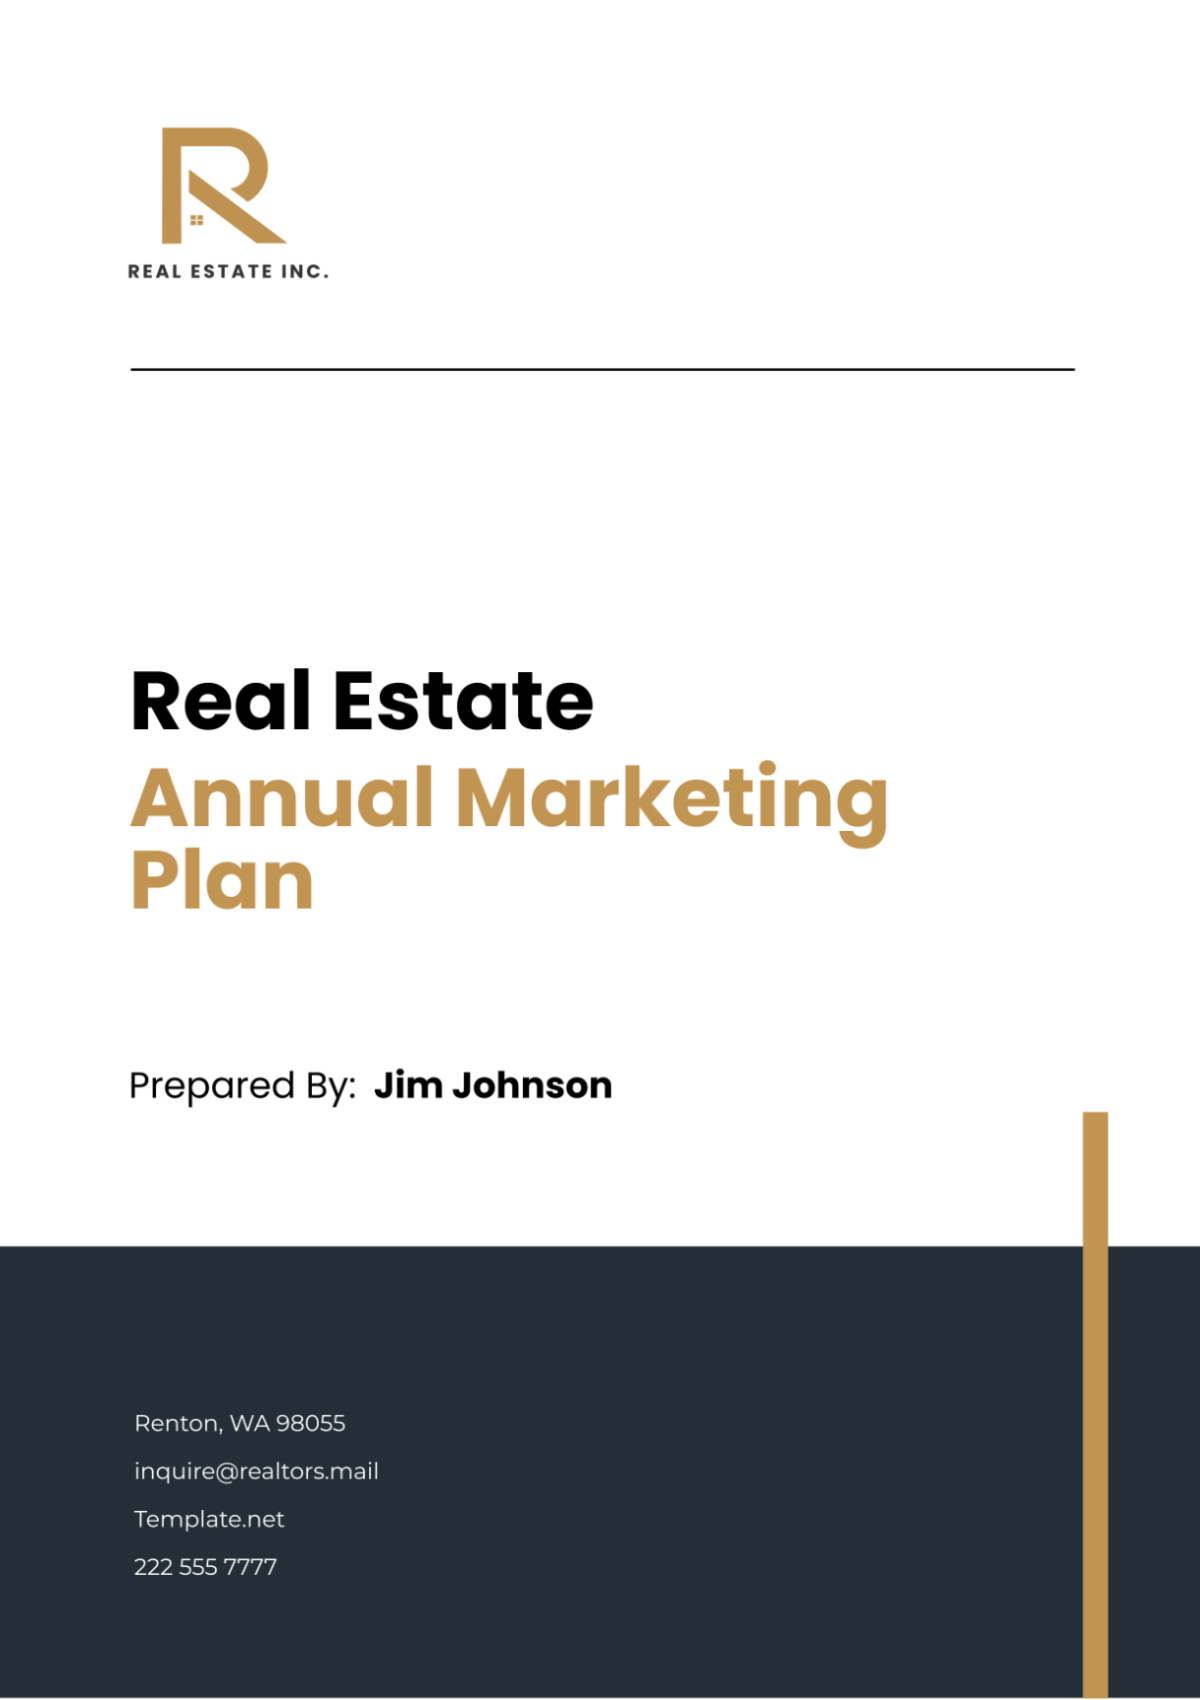 Real Estate Annual Marketing Plan Template